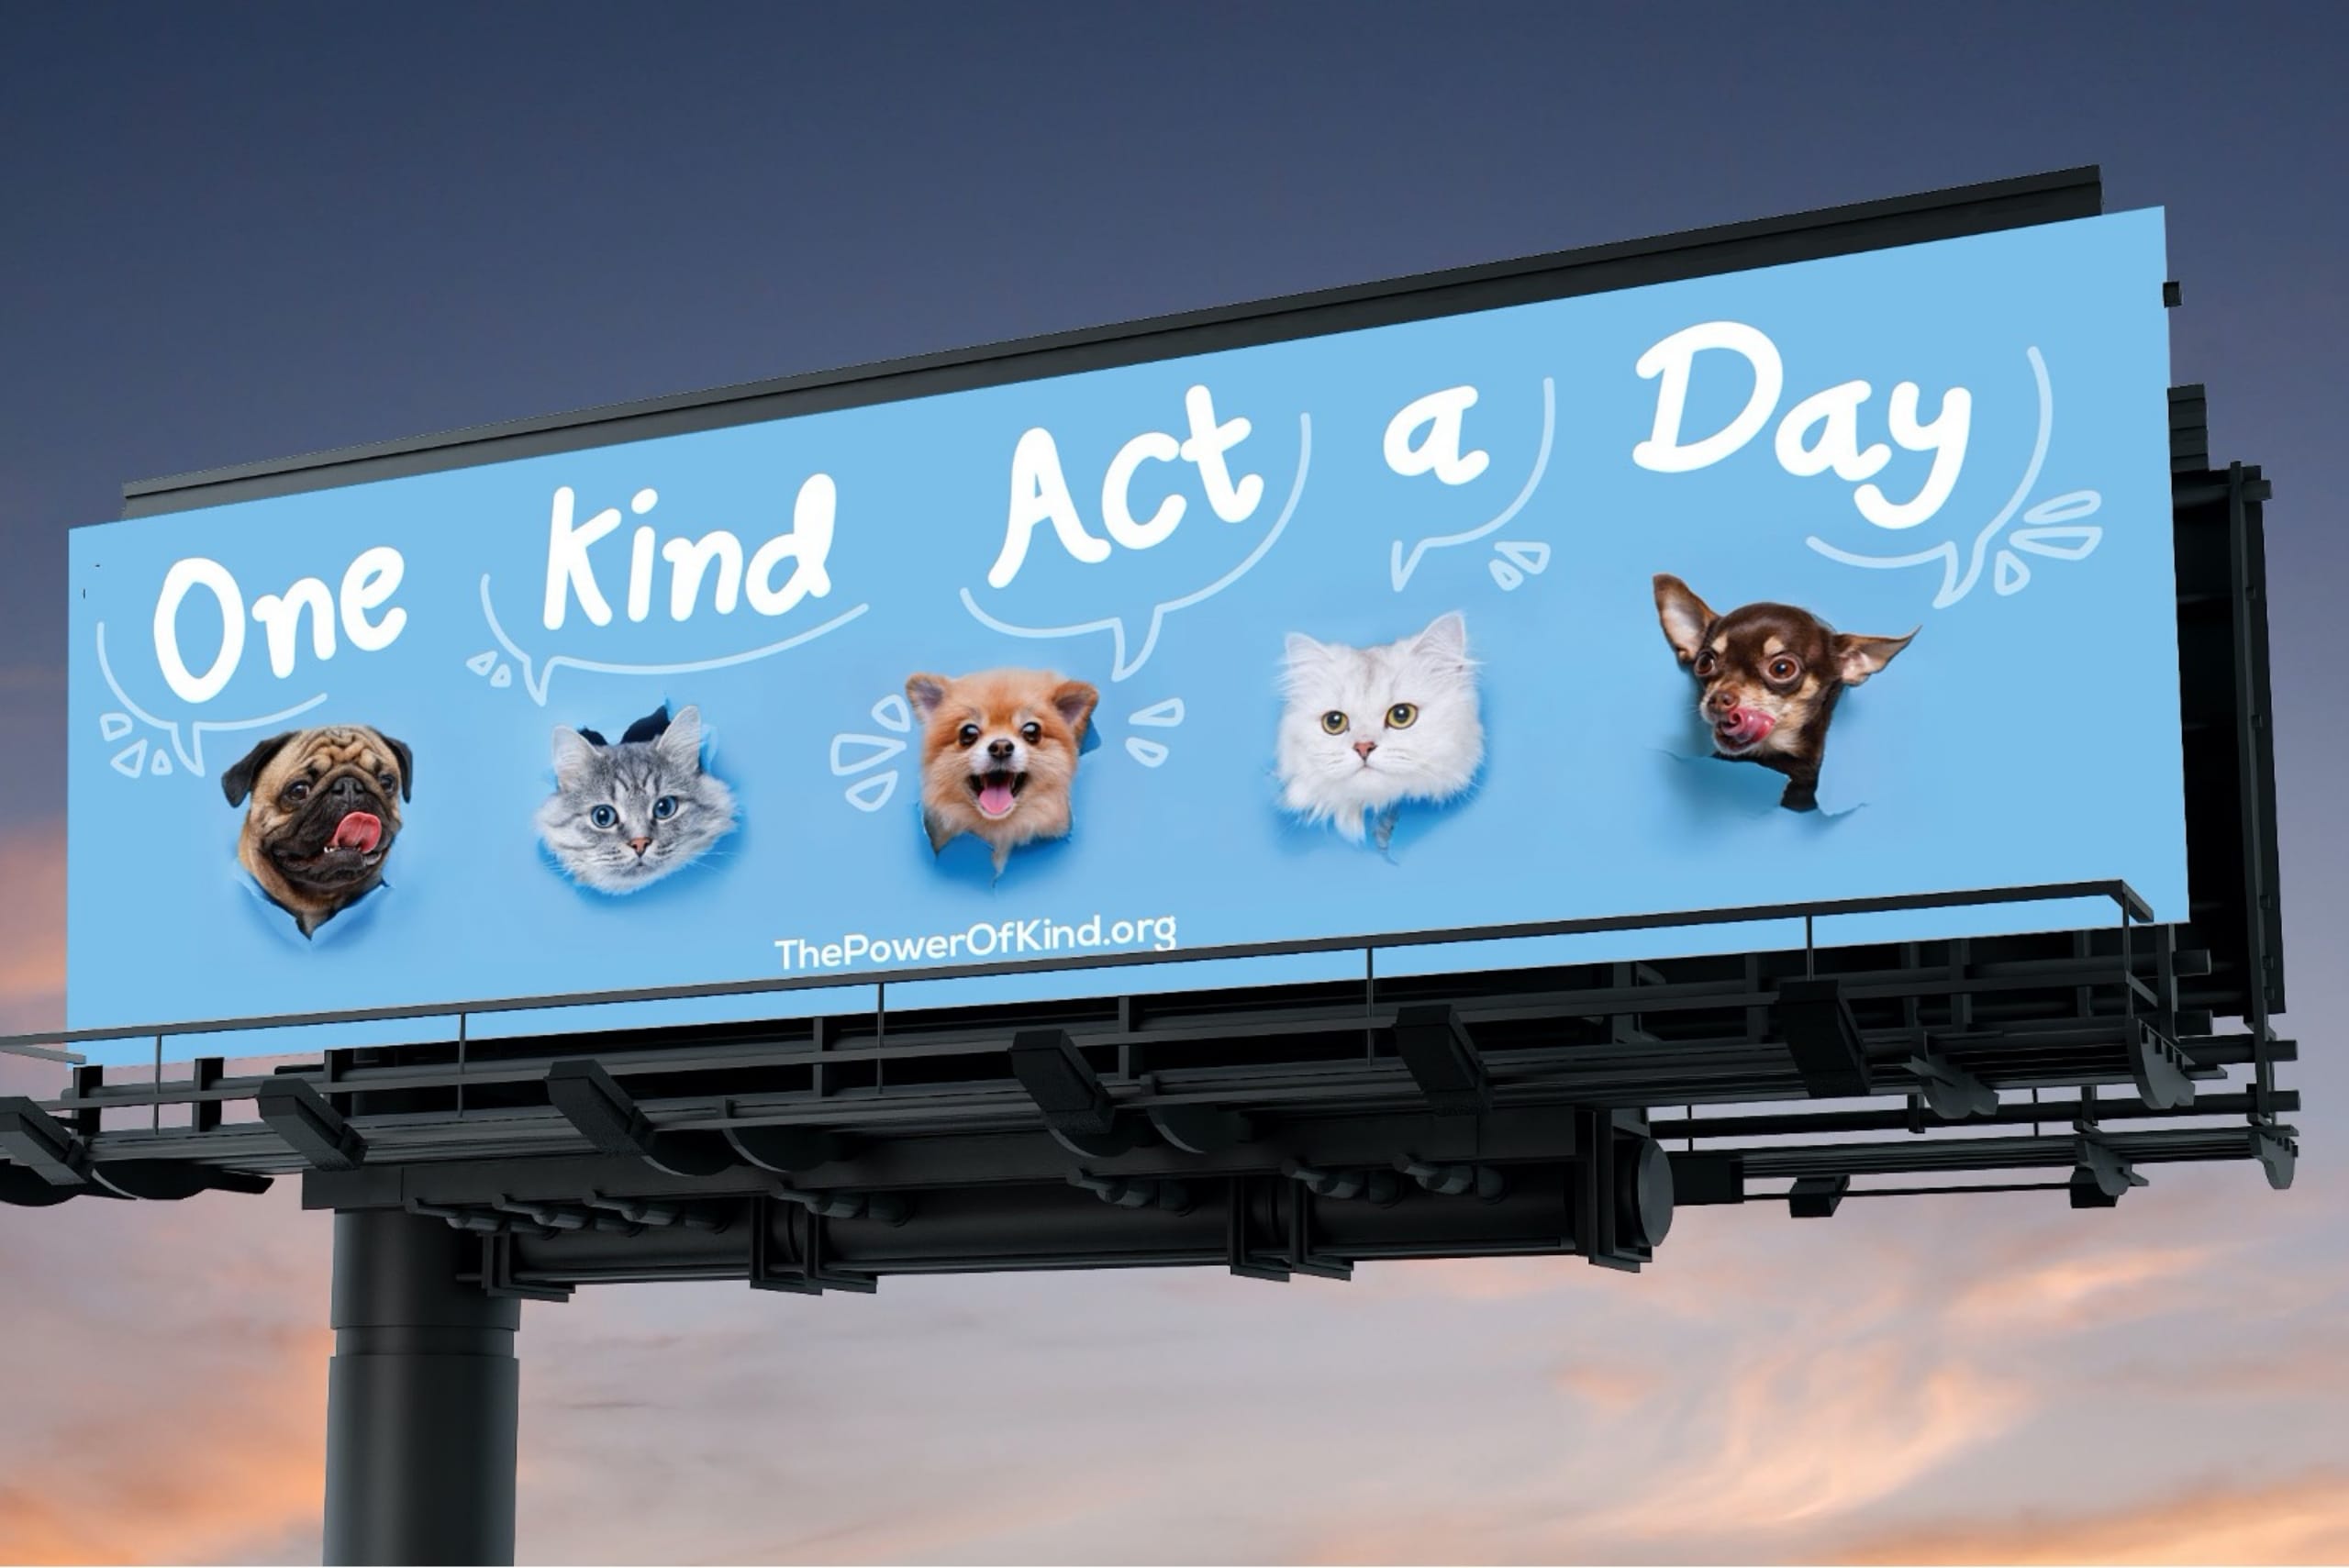 one kind act a day billboard